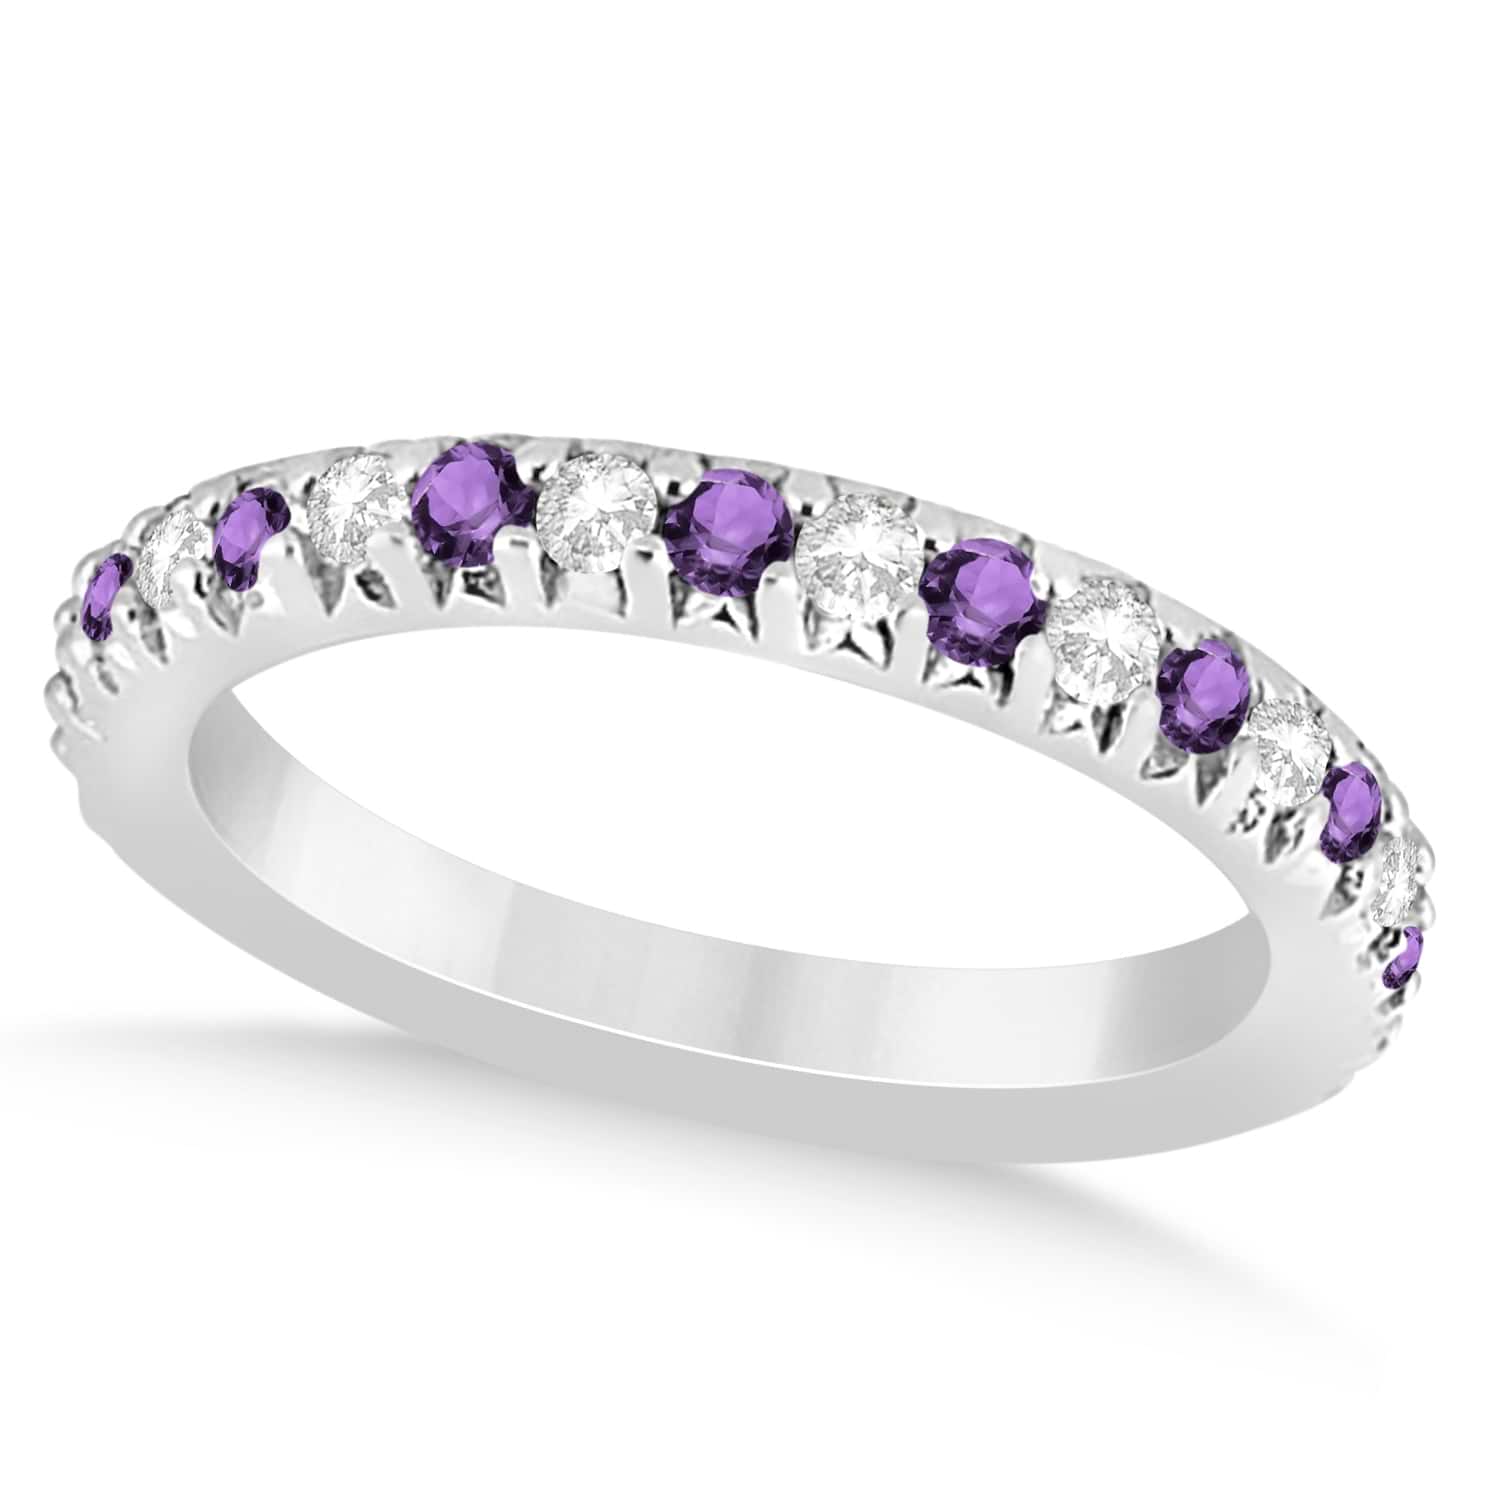 Amethyst & Diamond Accented Wedding Band 14k White Gold (0.60ct)